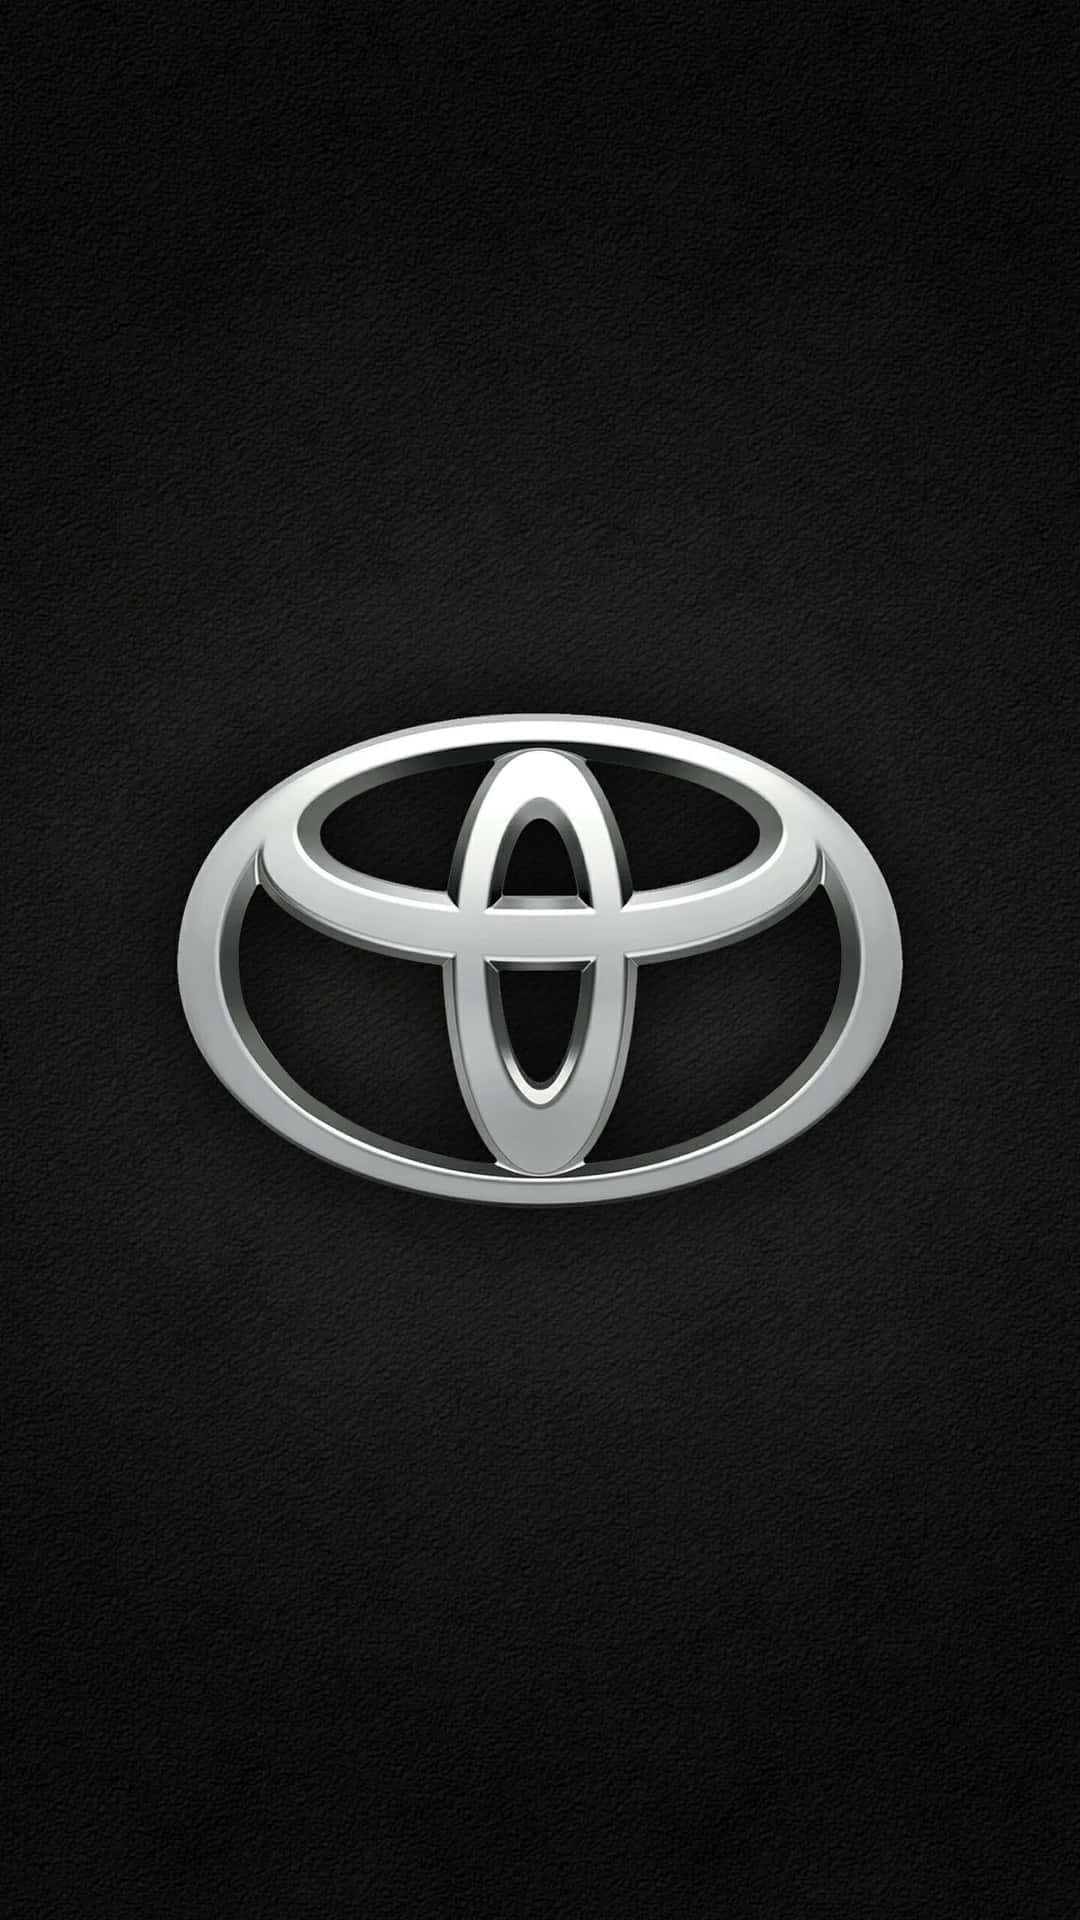 Caption: Sleek And Modern - The Artistry Of Toyota